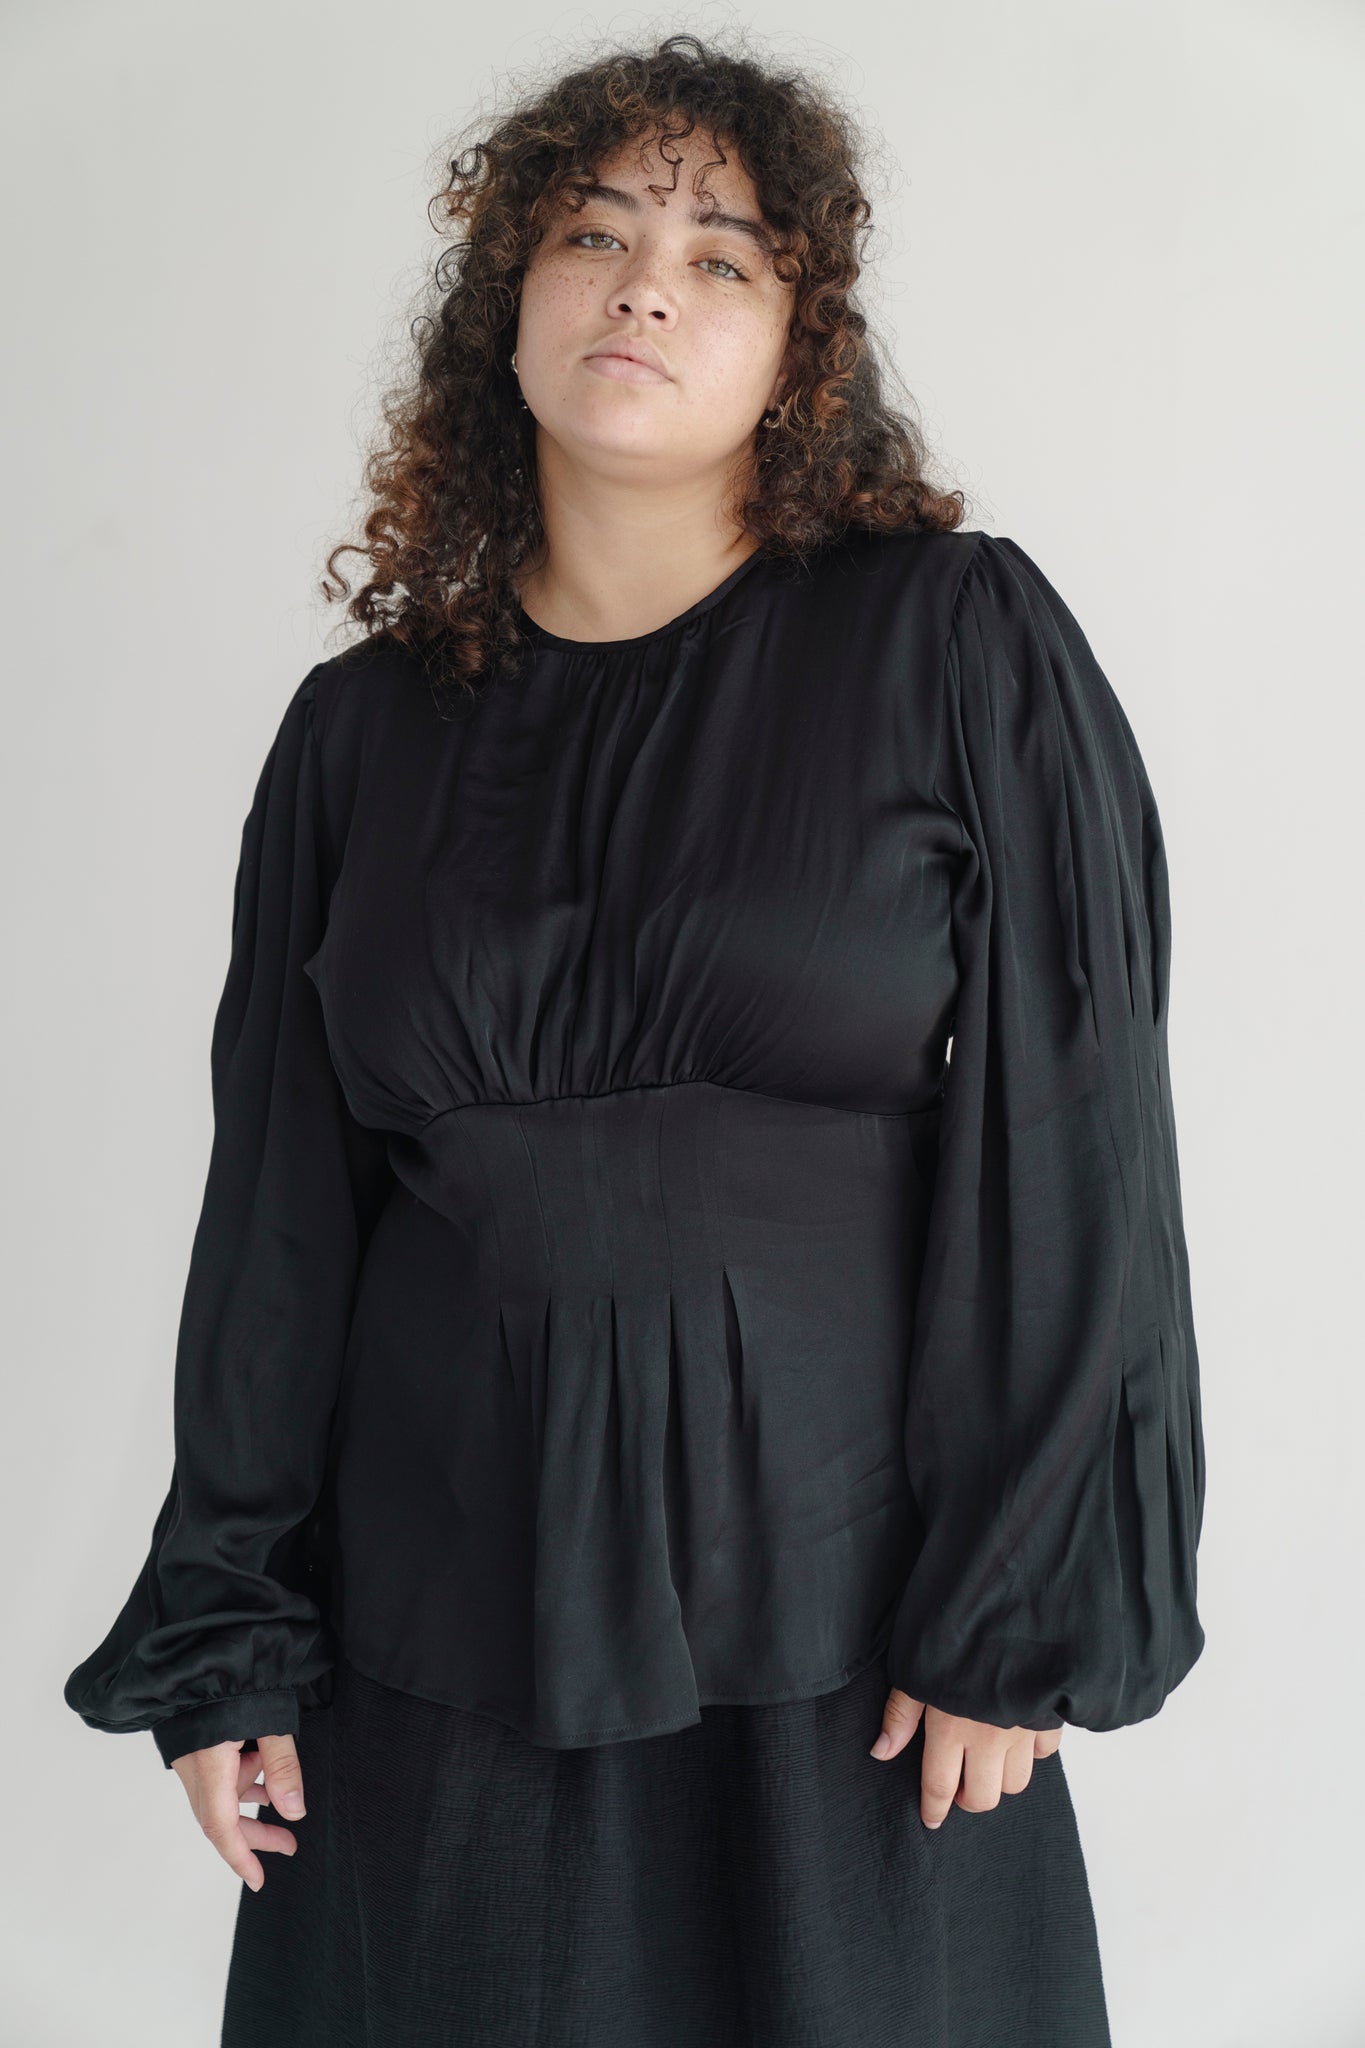 centra blouse in black rayon (size small)